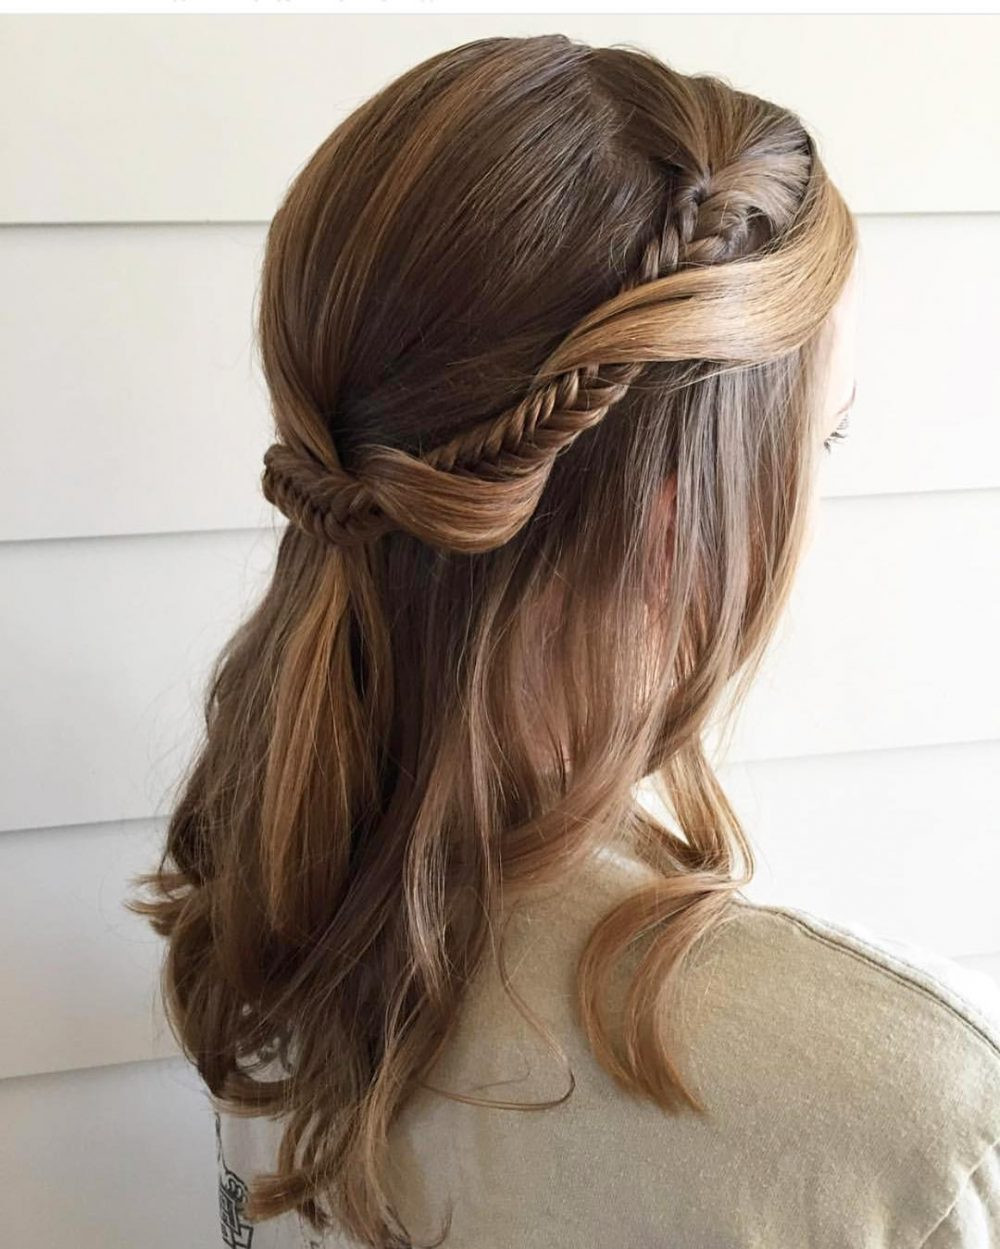 Simple Hairstyles For Prom
 21 Super Easy Updos Anyone Can Do Trending in 2019